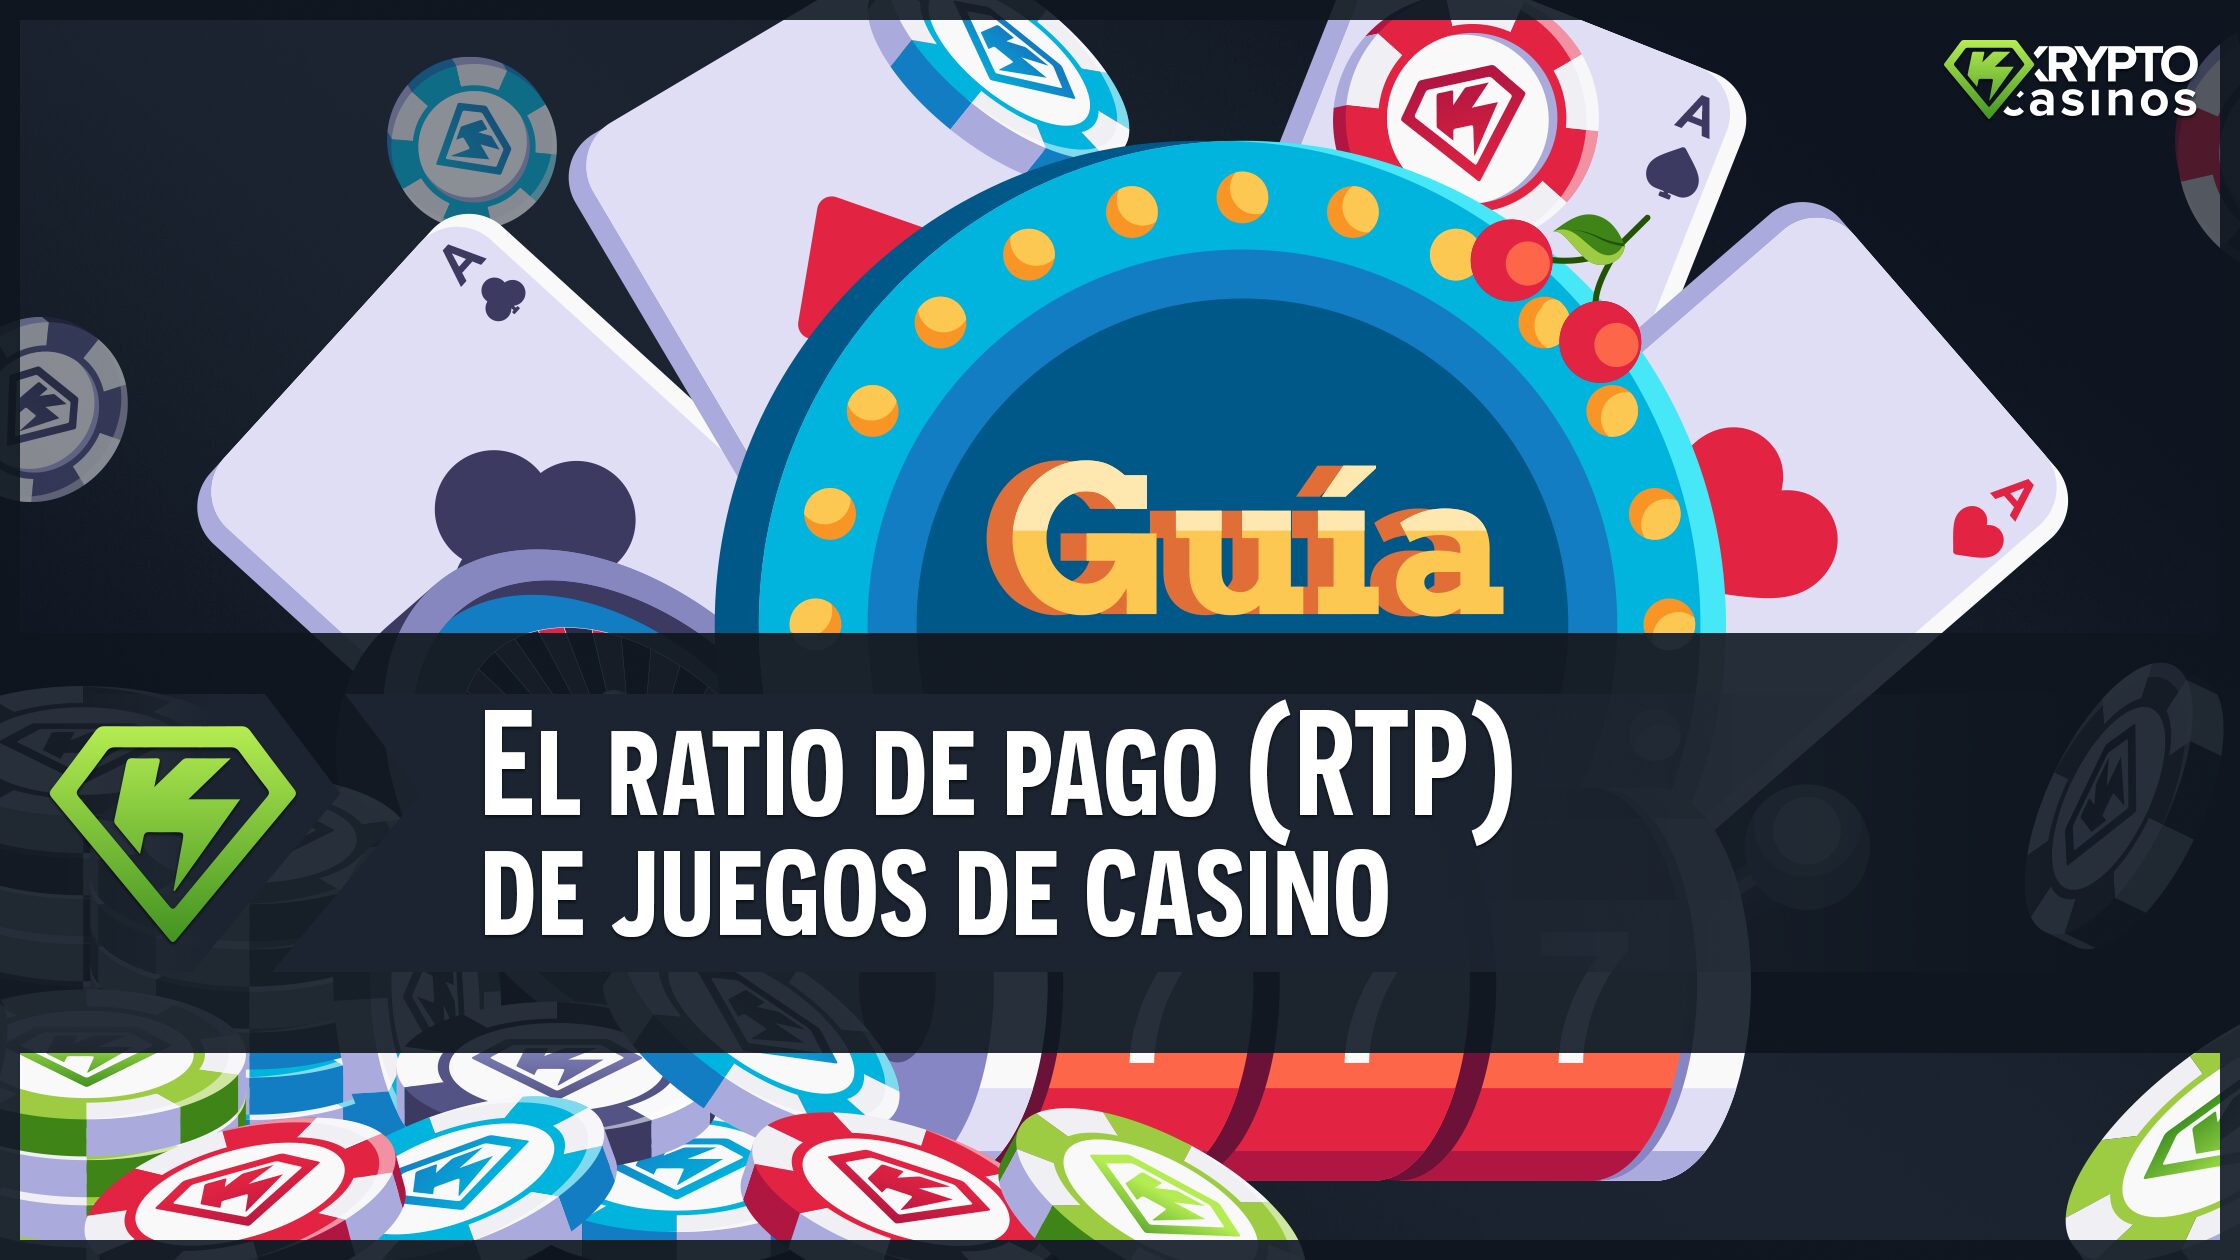 5 Best Ways To Sell casino sin licencia